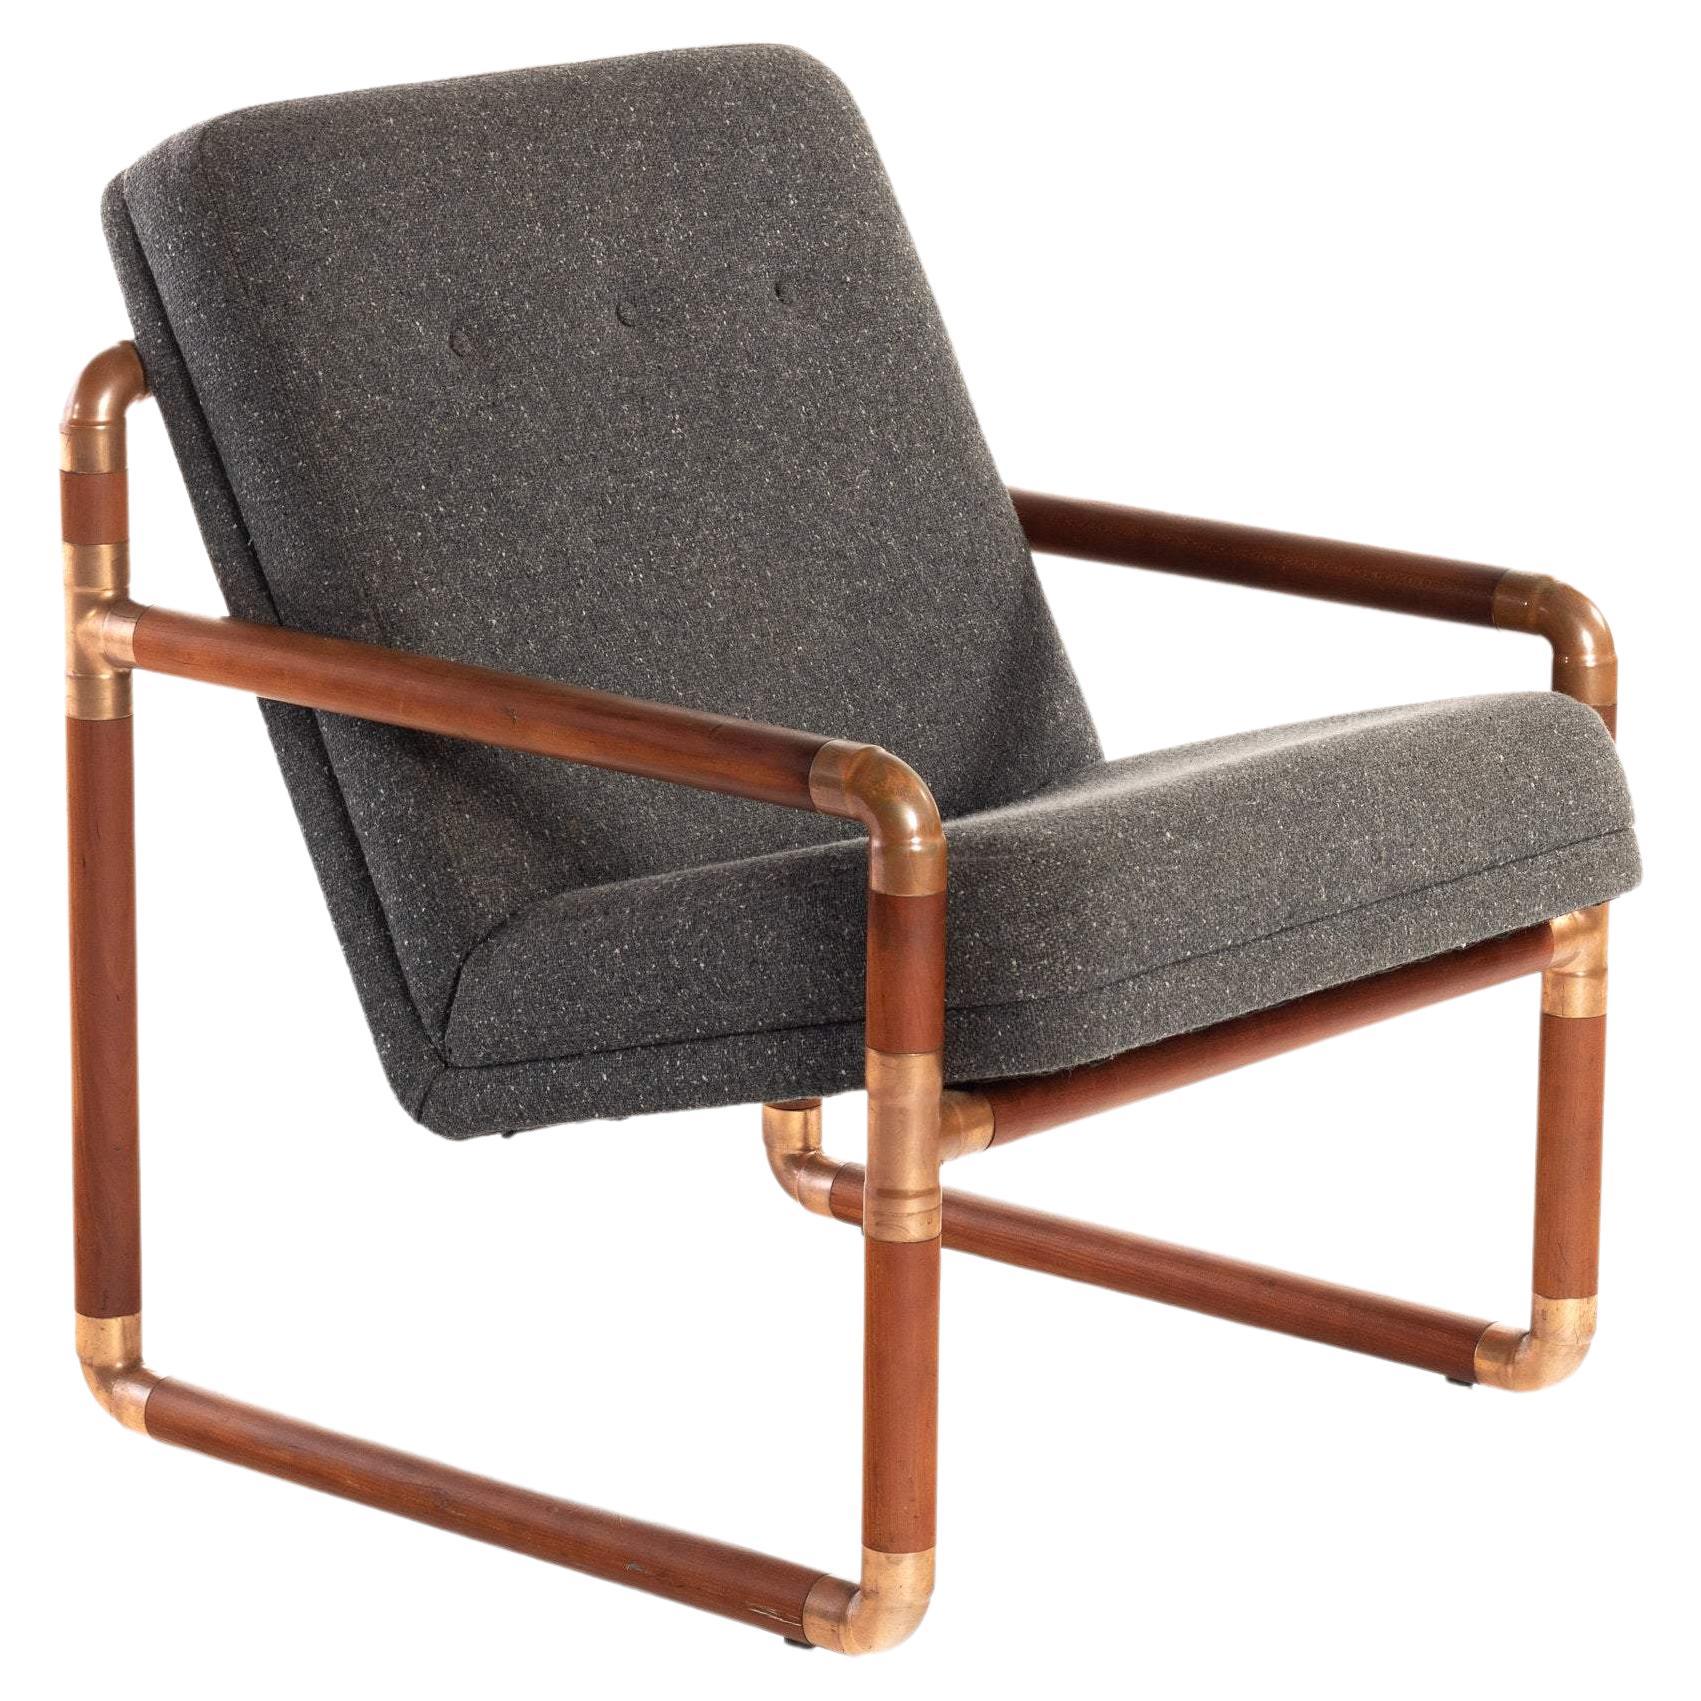 Unique Industrial Brass and Walnut Lounge Chair w/ Gray Tweed Upholstery, USA For Sale